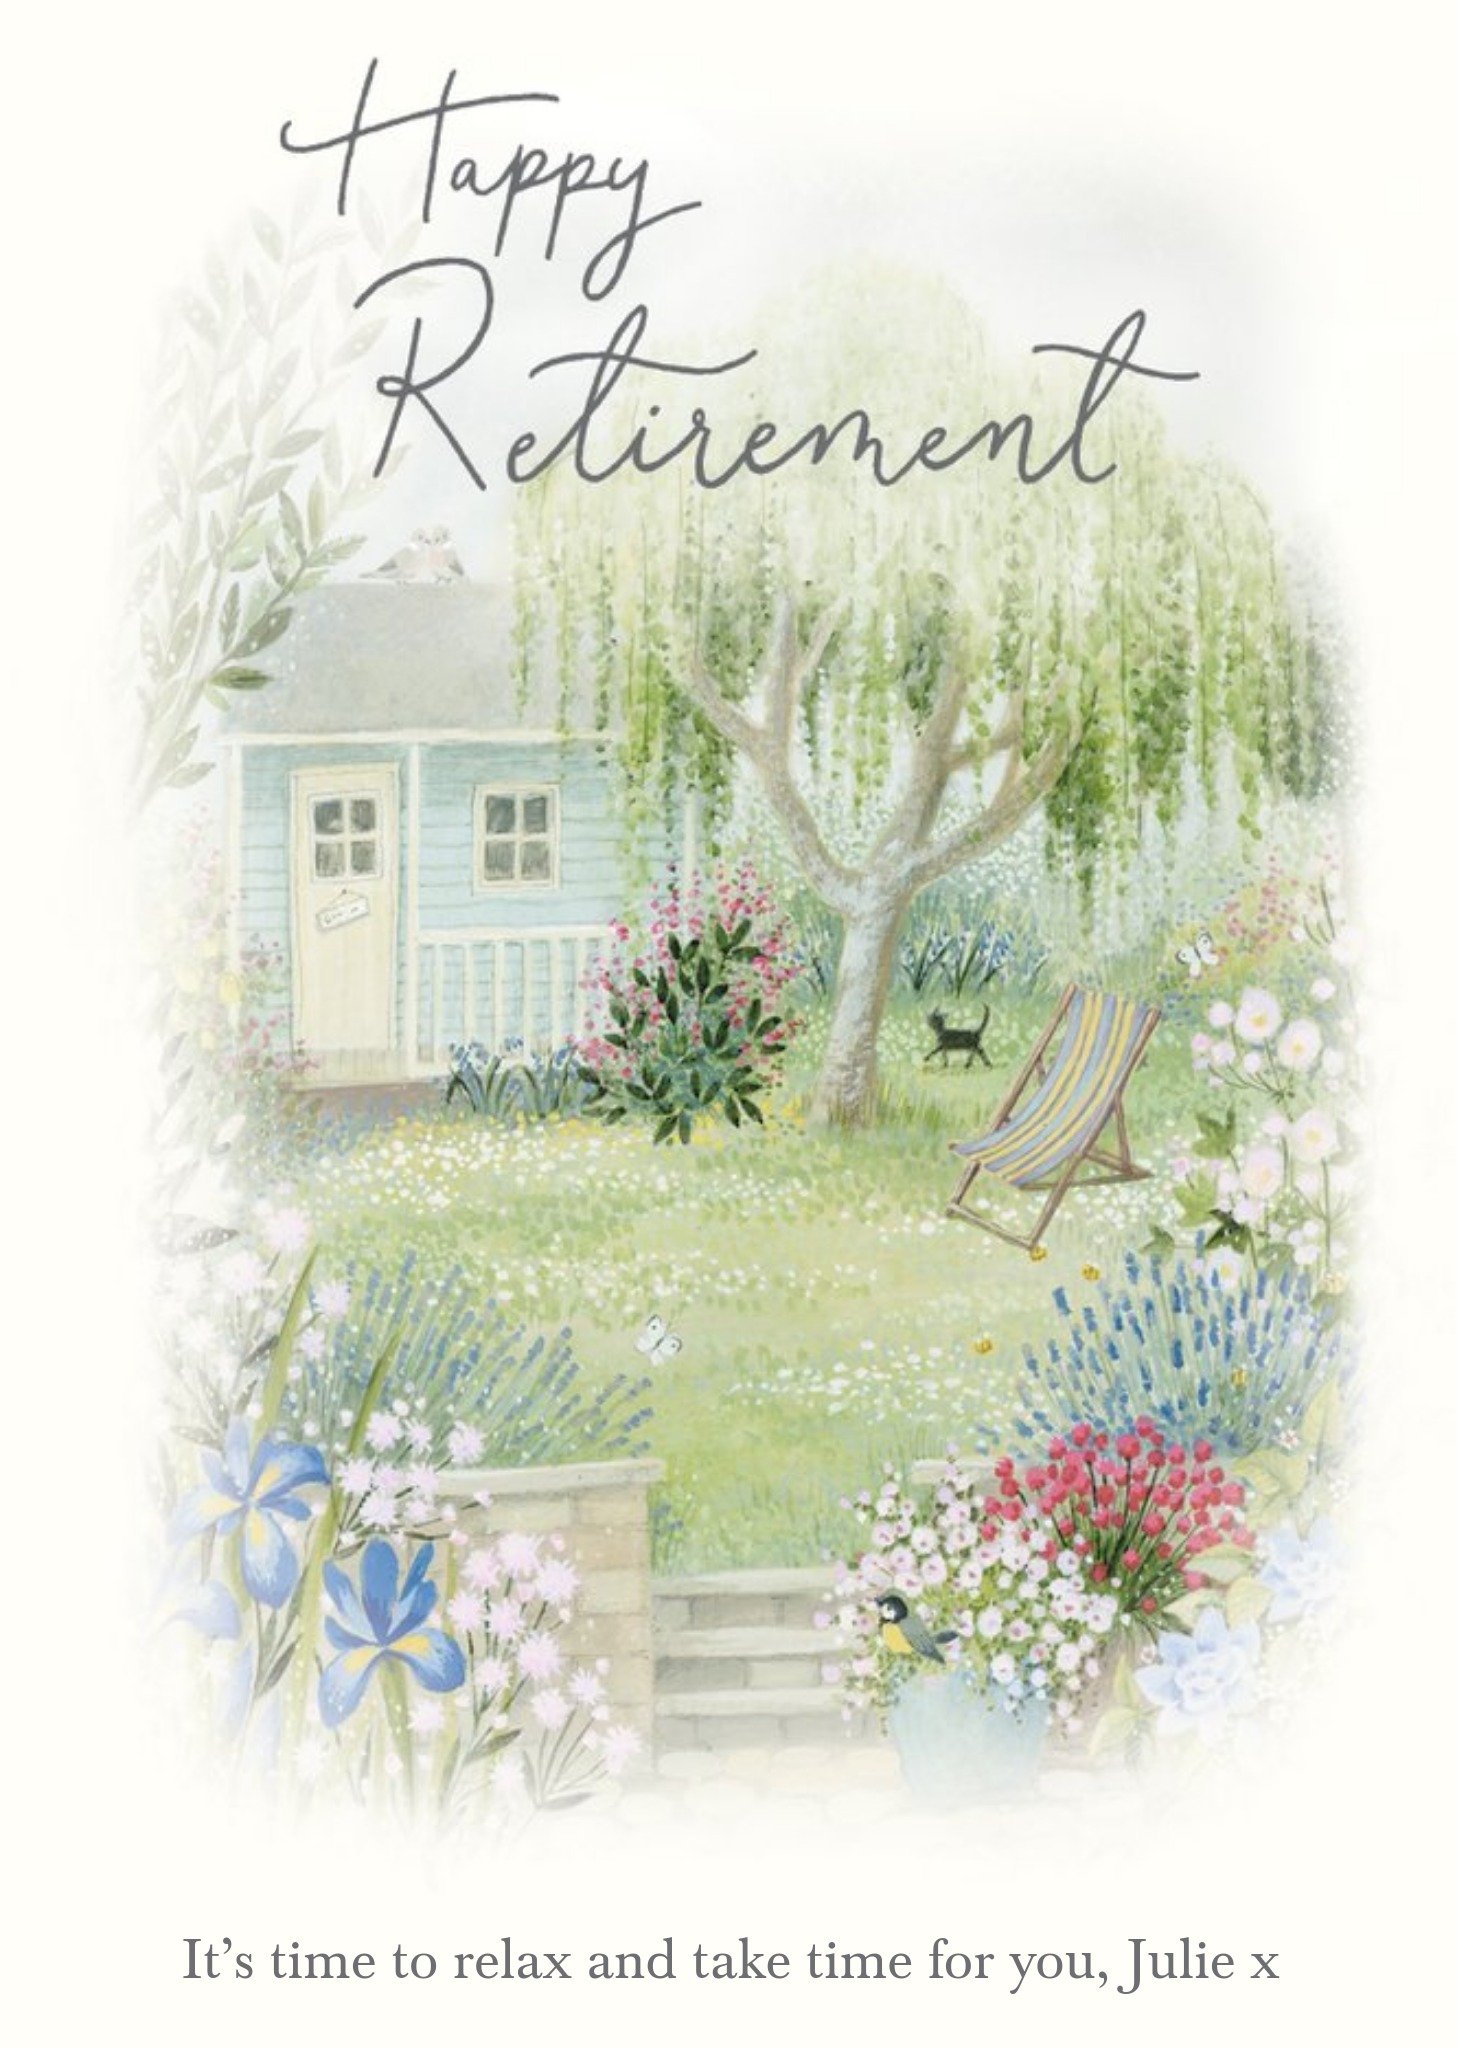 Moonpig Illustration Of A Garden Filled With Flowers Happy Retirement Card, Large